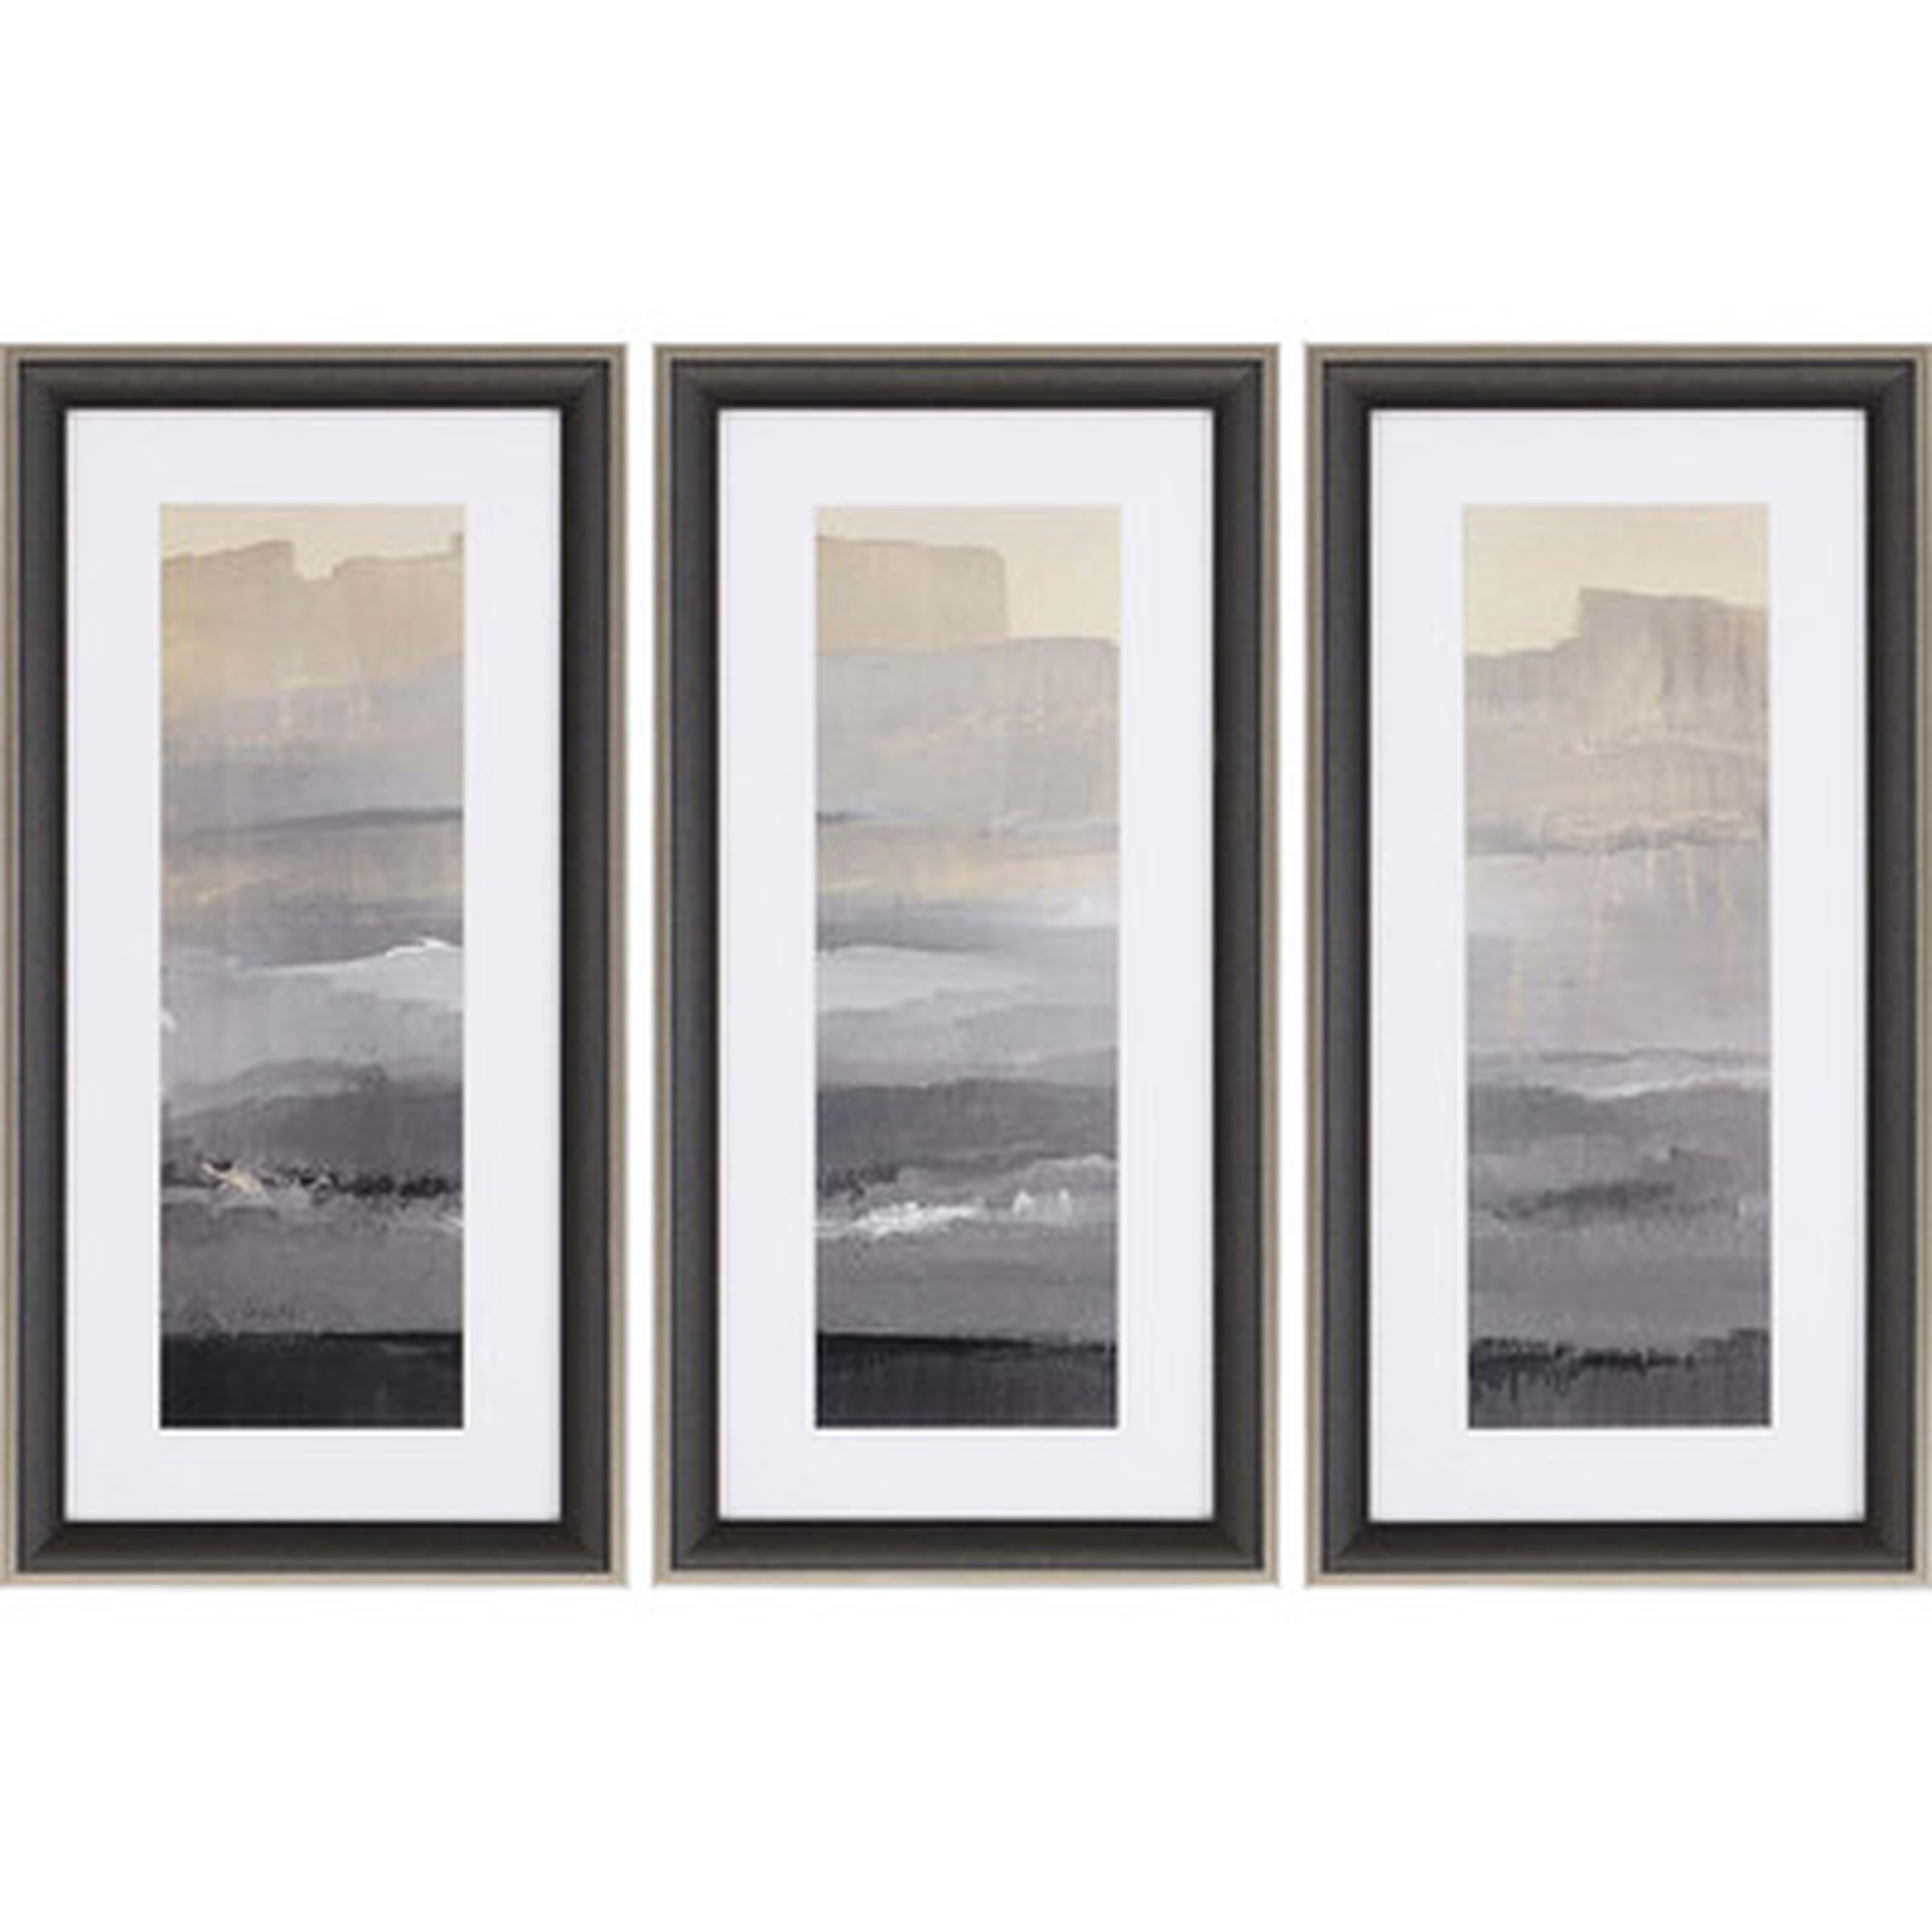 'In the Distance' 3 Piece Framed Painting Print Set - Wayfair